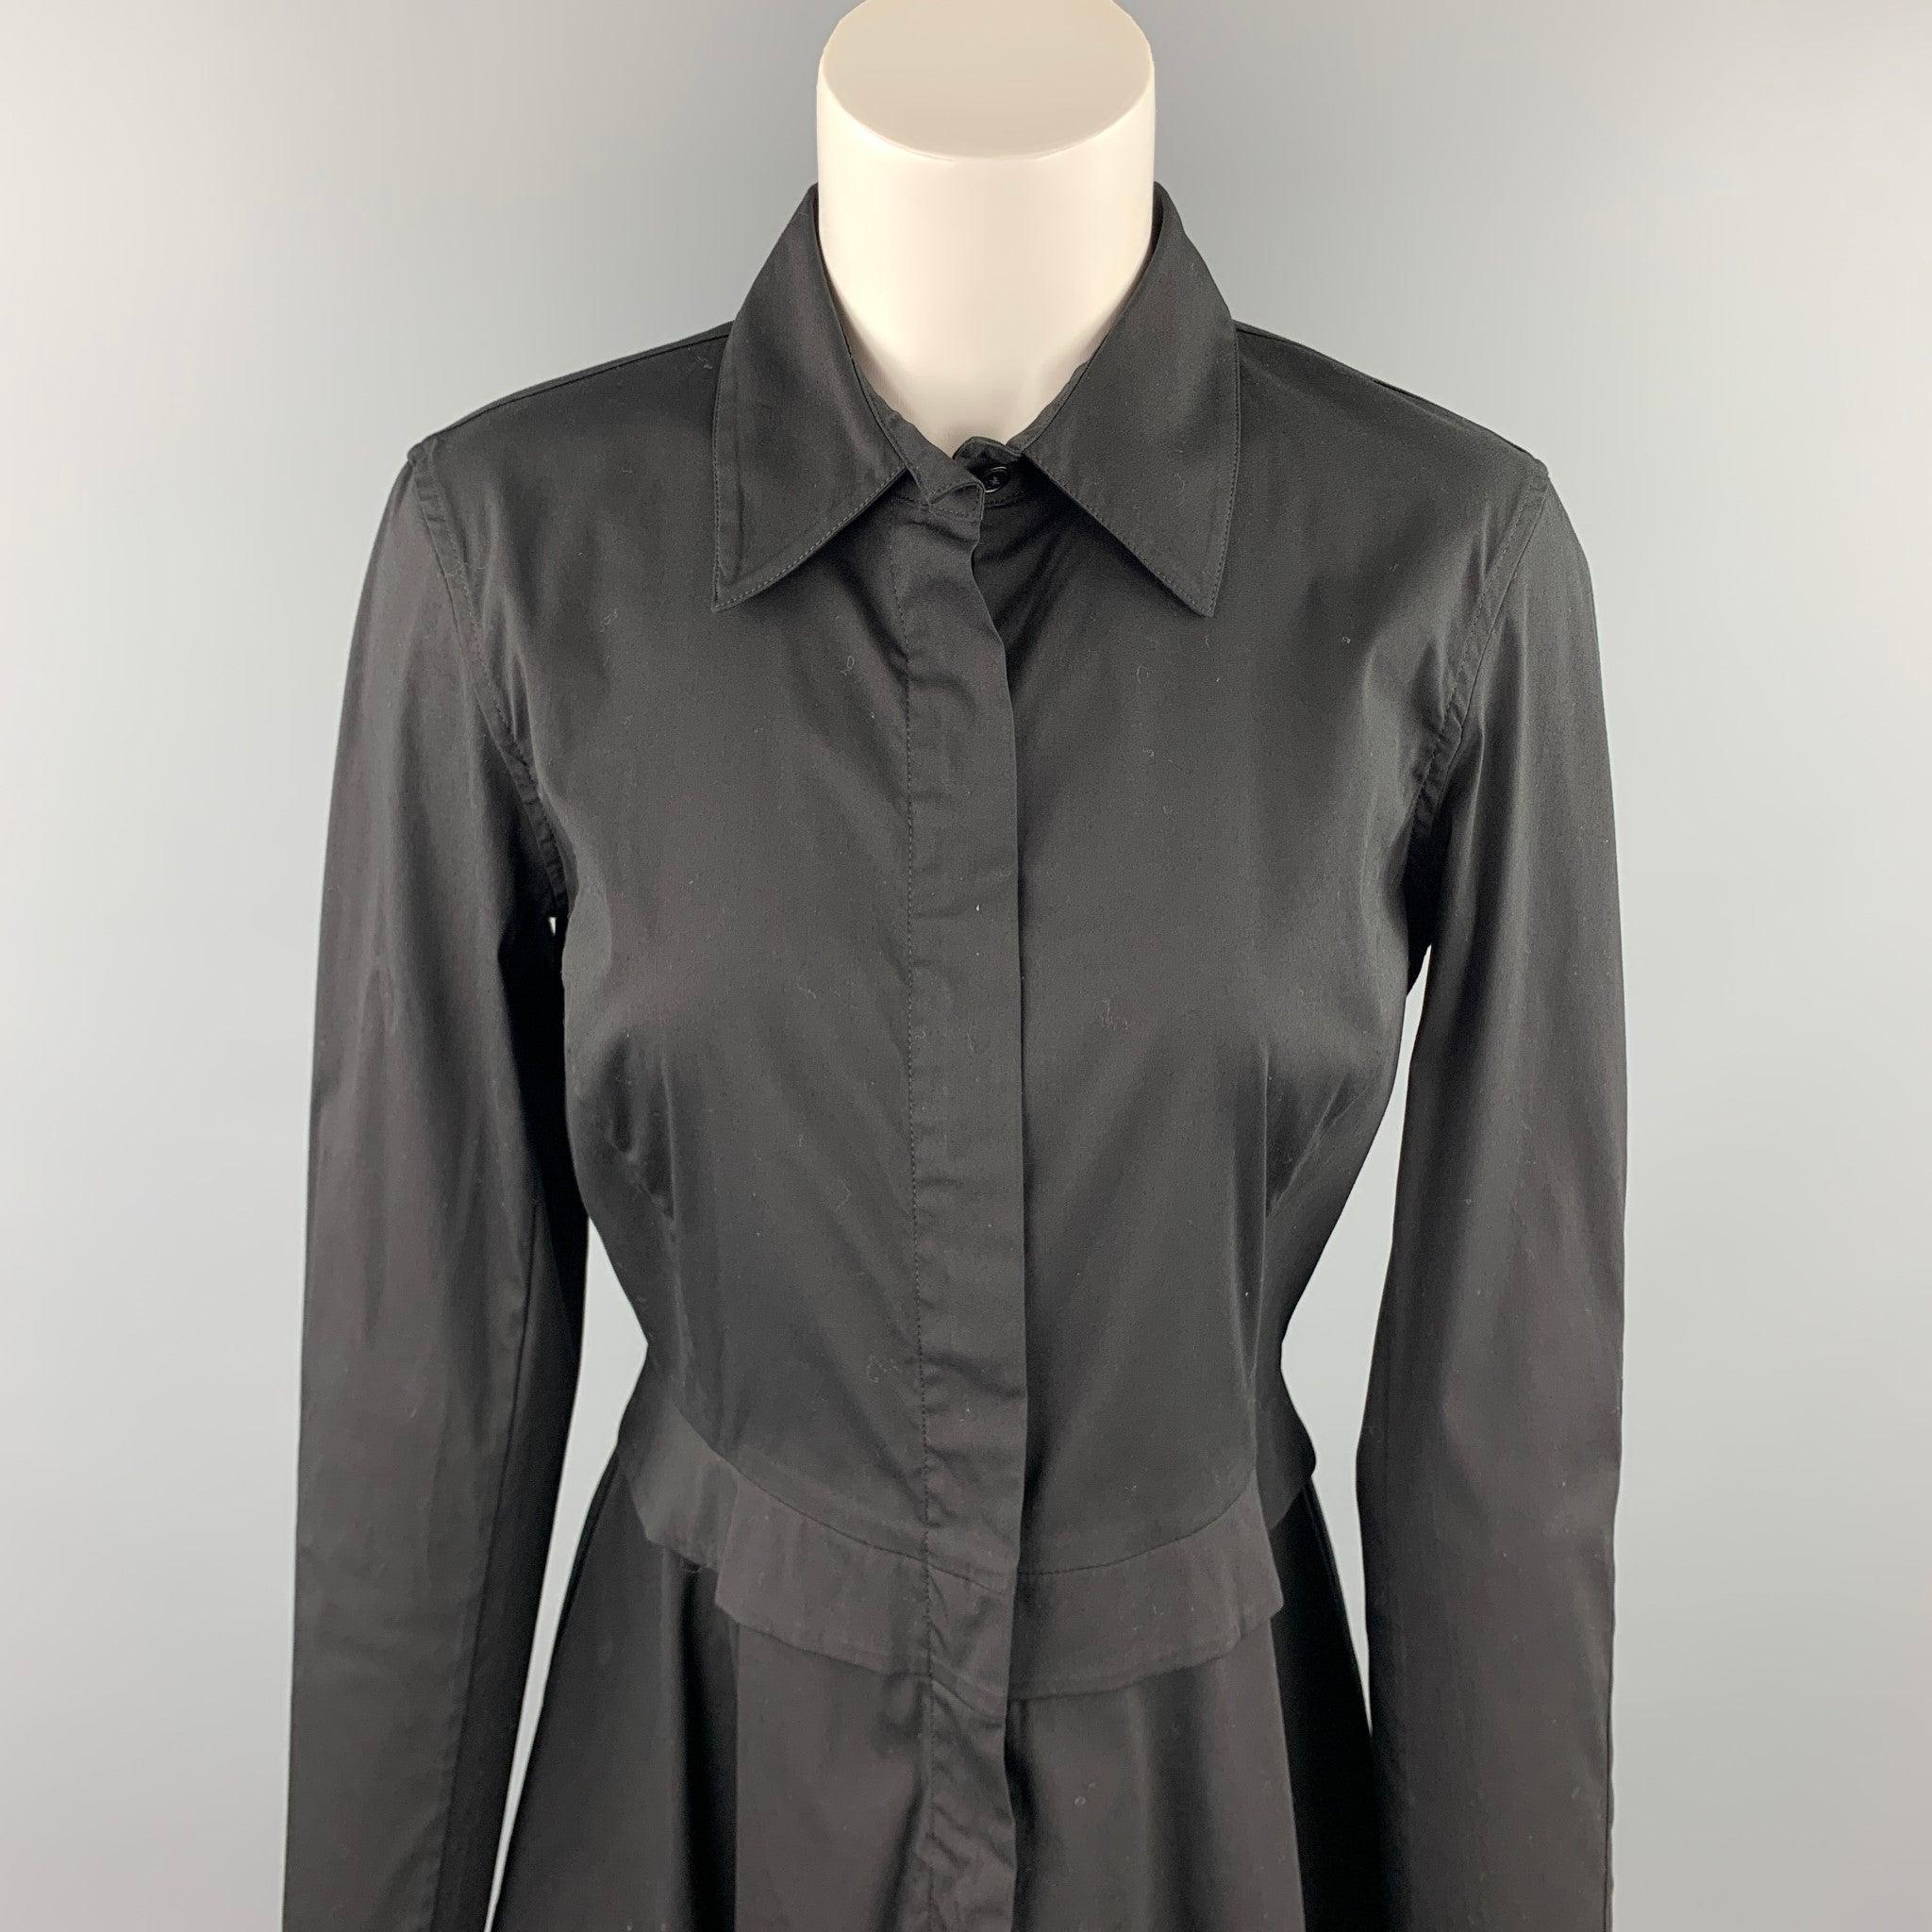 DONNA KARAN shirt dress comes in a black cotton blend featuring long sleeves, spread collar, mini a-line skirt, and a front zip up closure.Excellent
Pre-Owned Condition. 

Marked:   US 8 

Measurements: 
 
Shoulder: 16 inches 
Bust: 34 inches